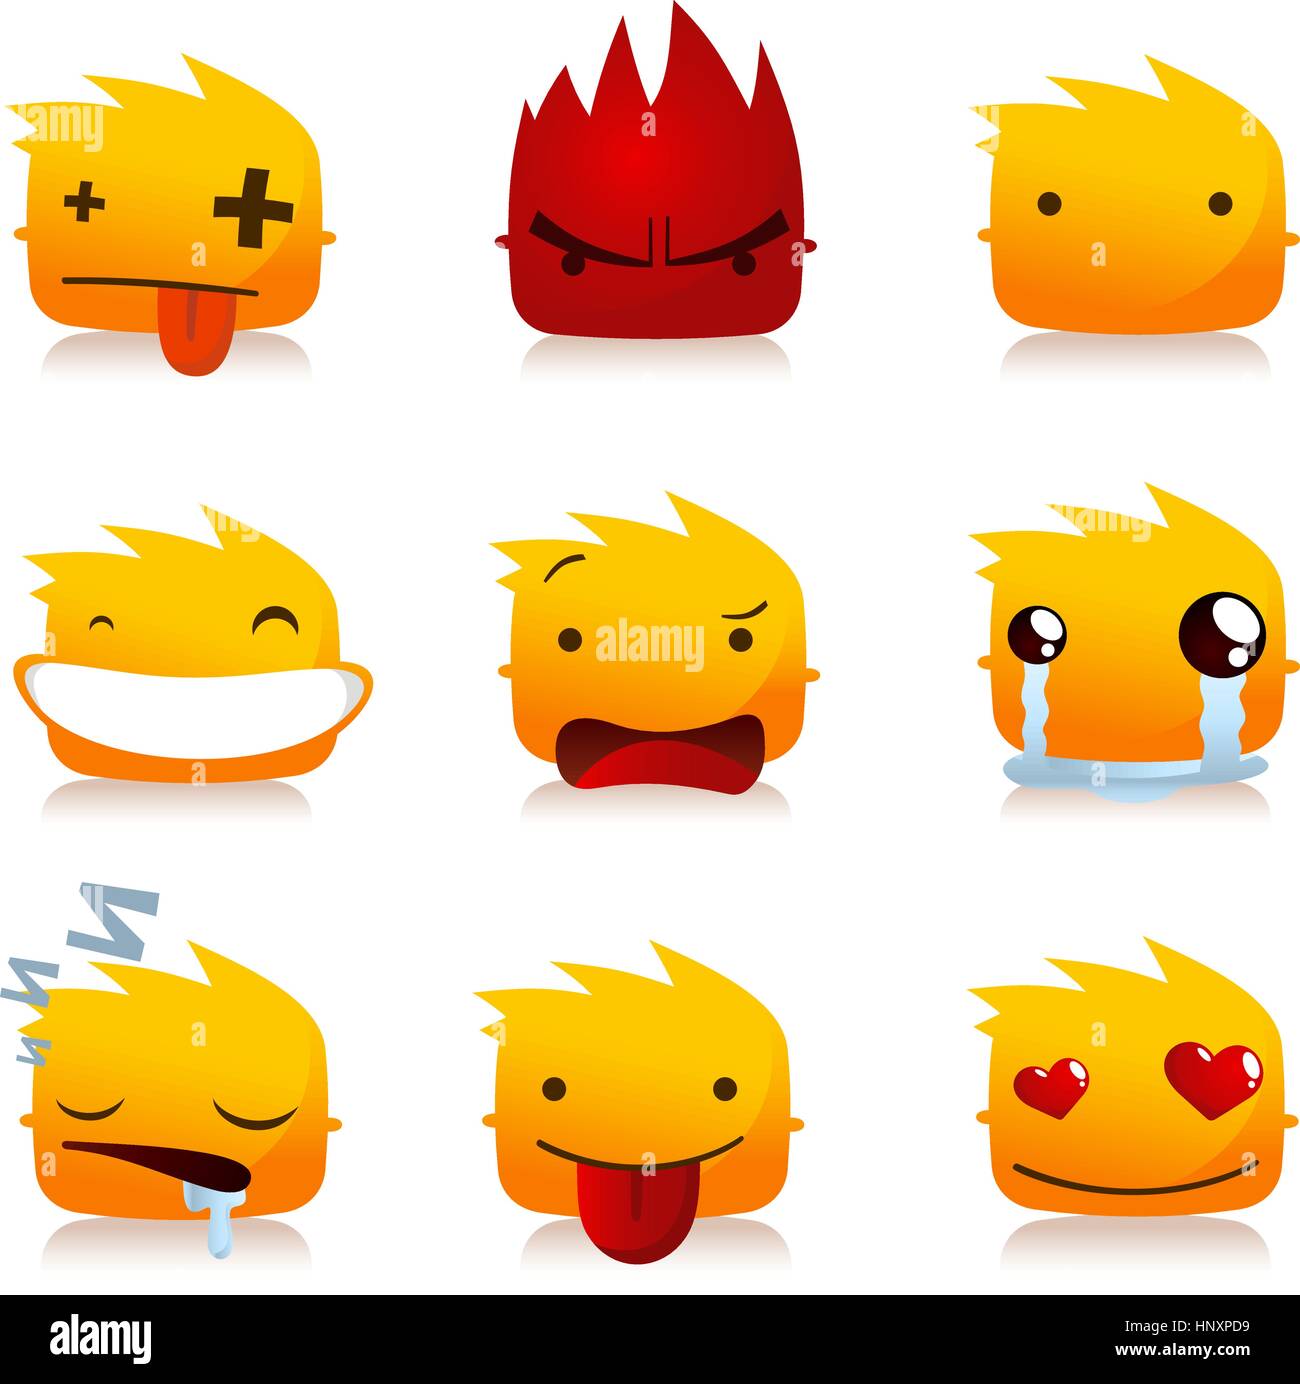 Fire Flame Smileys with Head People Avatar Profile collection Set, vector illustration Stock Vector